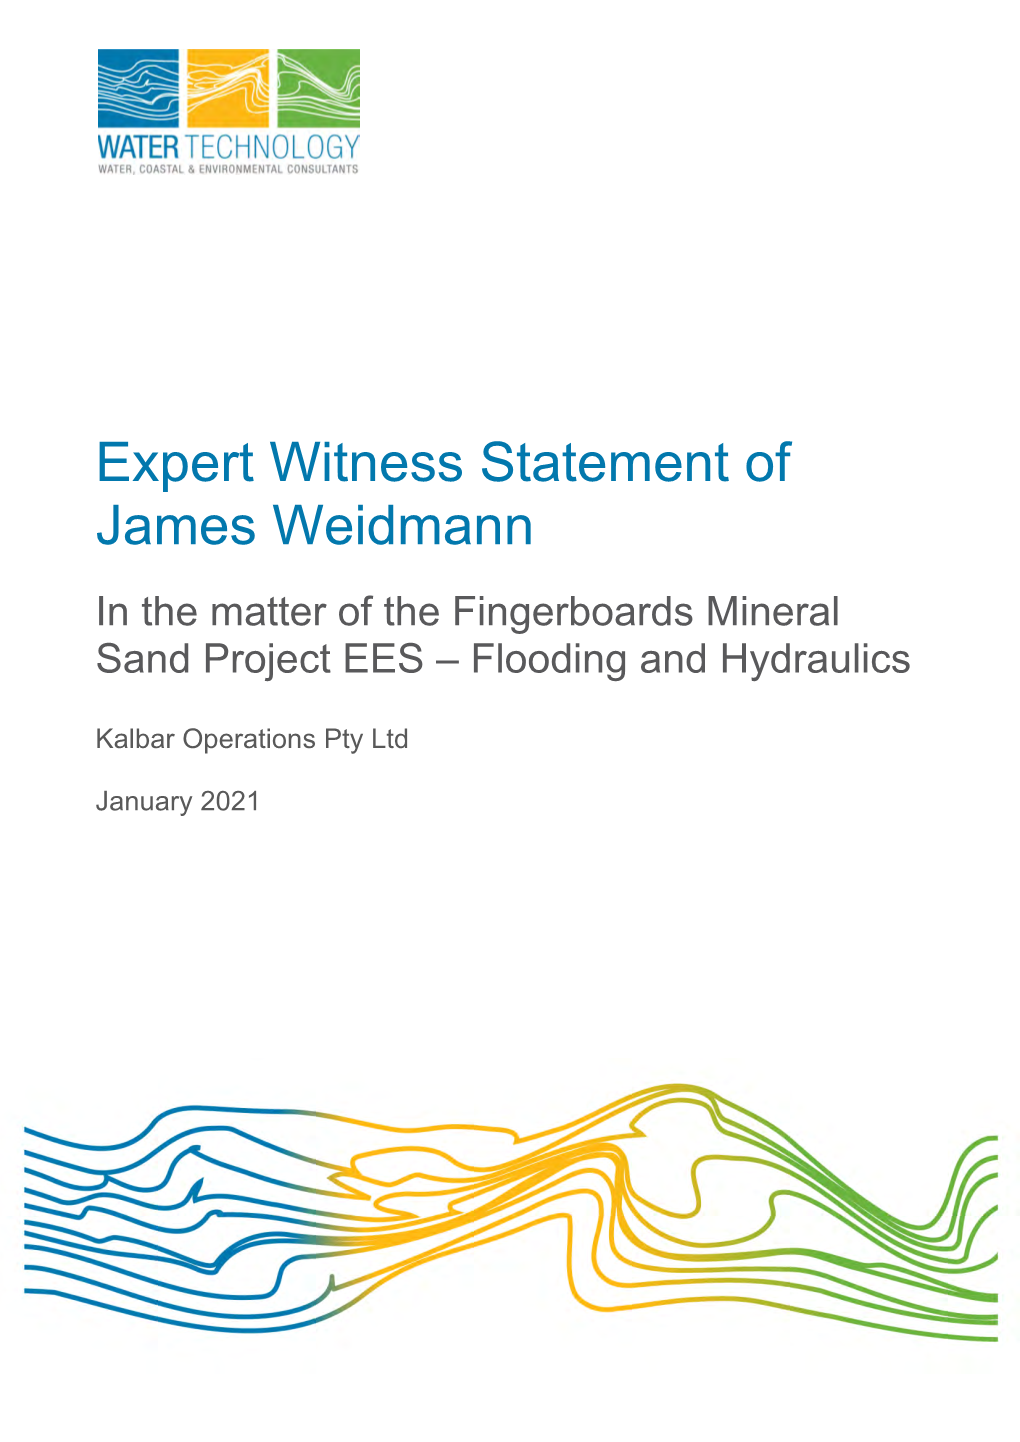 Expert Witness Statement of James Weidmann in the Matter of the Fingerboards Mineral Sand Project EES – Flooding and Hydraulics